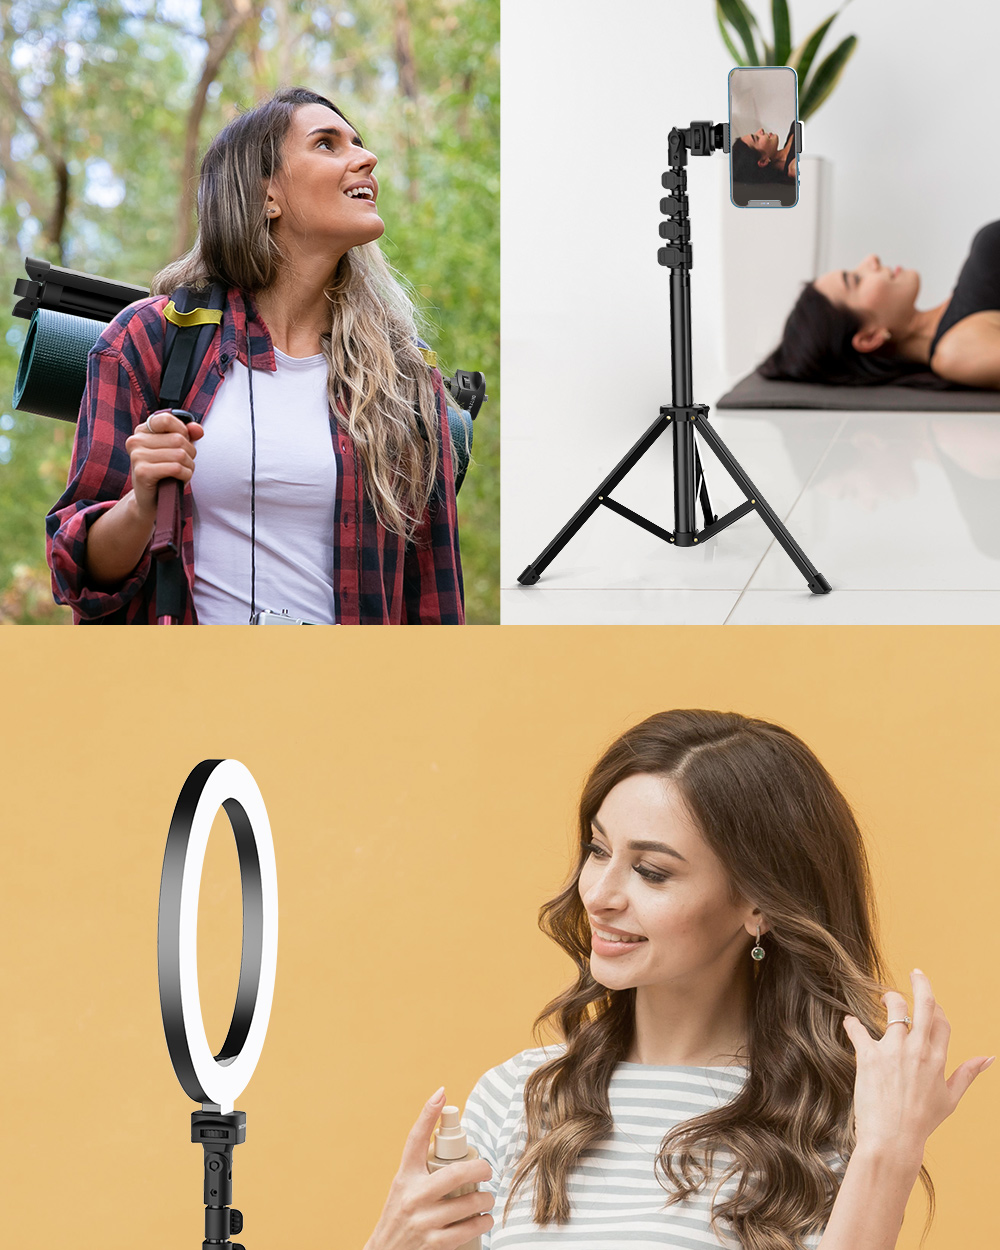 BlitzWolf® BW-STB1 Stable Tripod Selfie Stick Wireless Remote Shutter Multi-angle Professional Portable Selfie Stick for Phones Cameras Ring Light